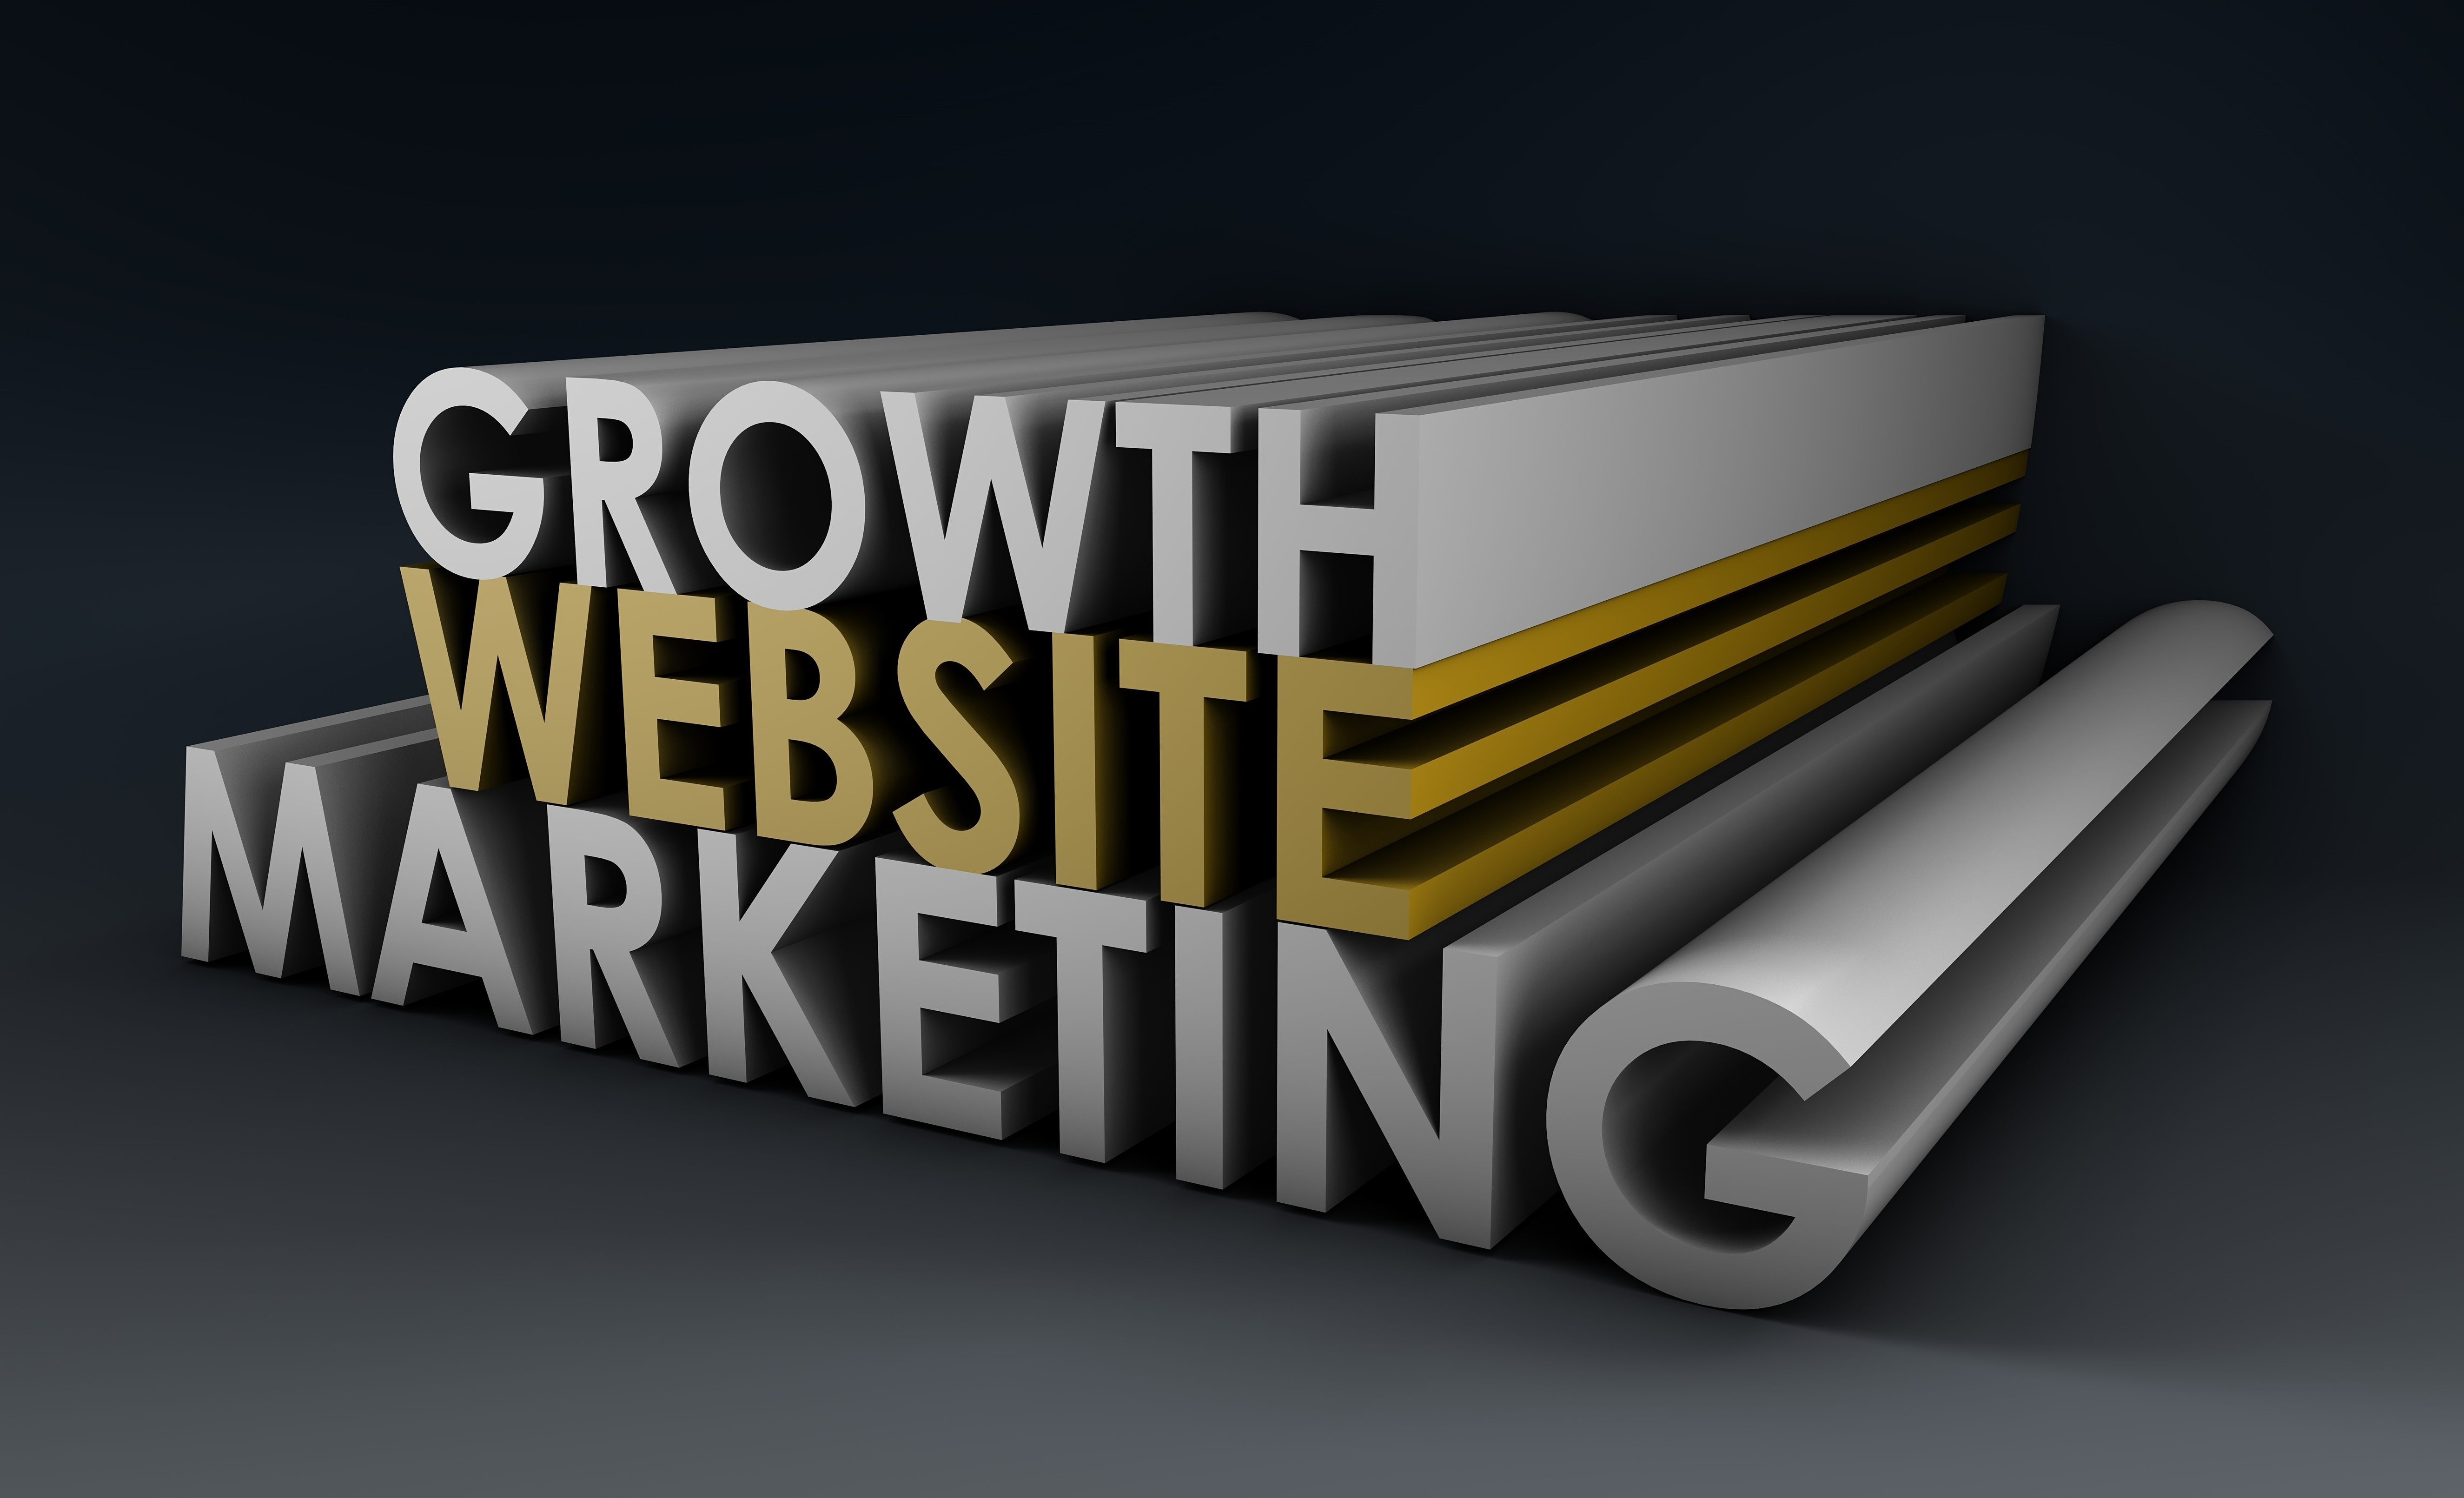 3-D Words for Growth, Website, Marketing